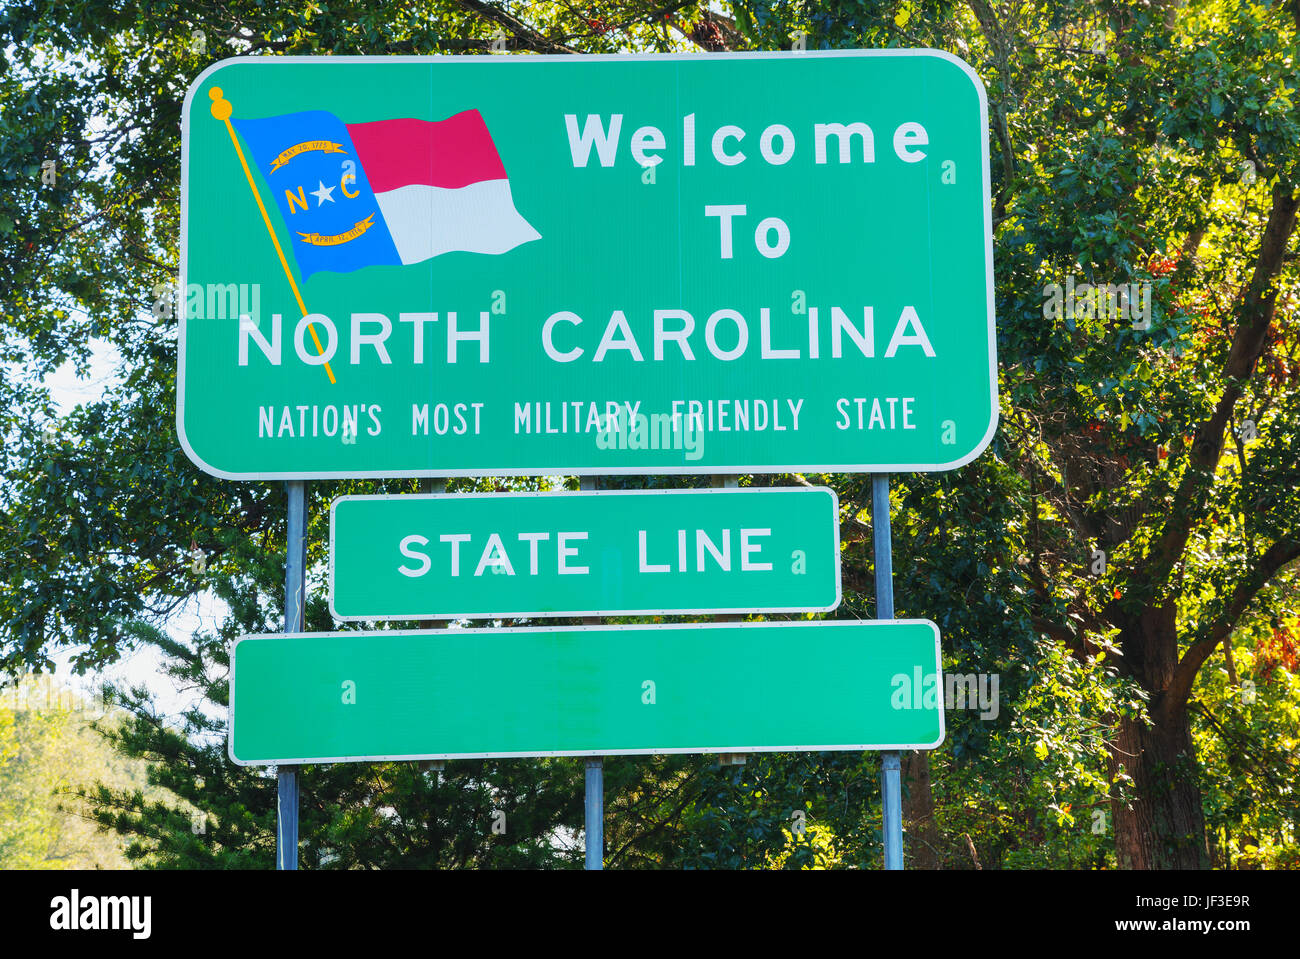 Welcome to North Carolina road sign Stock Photo